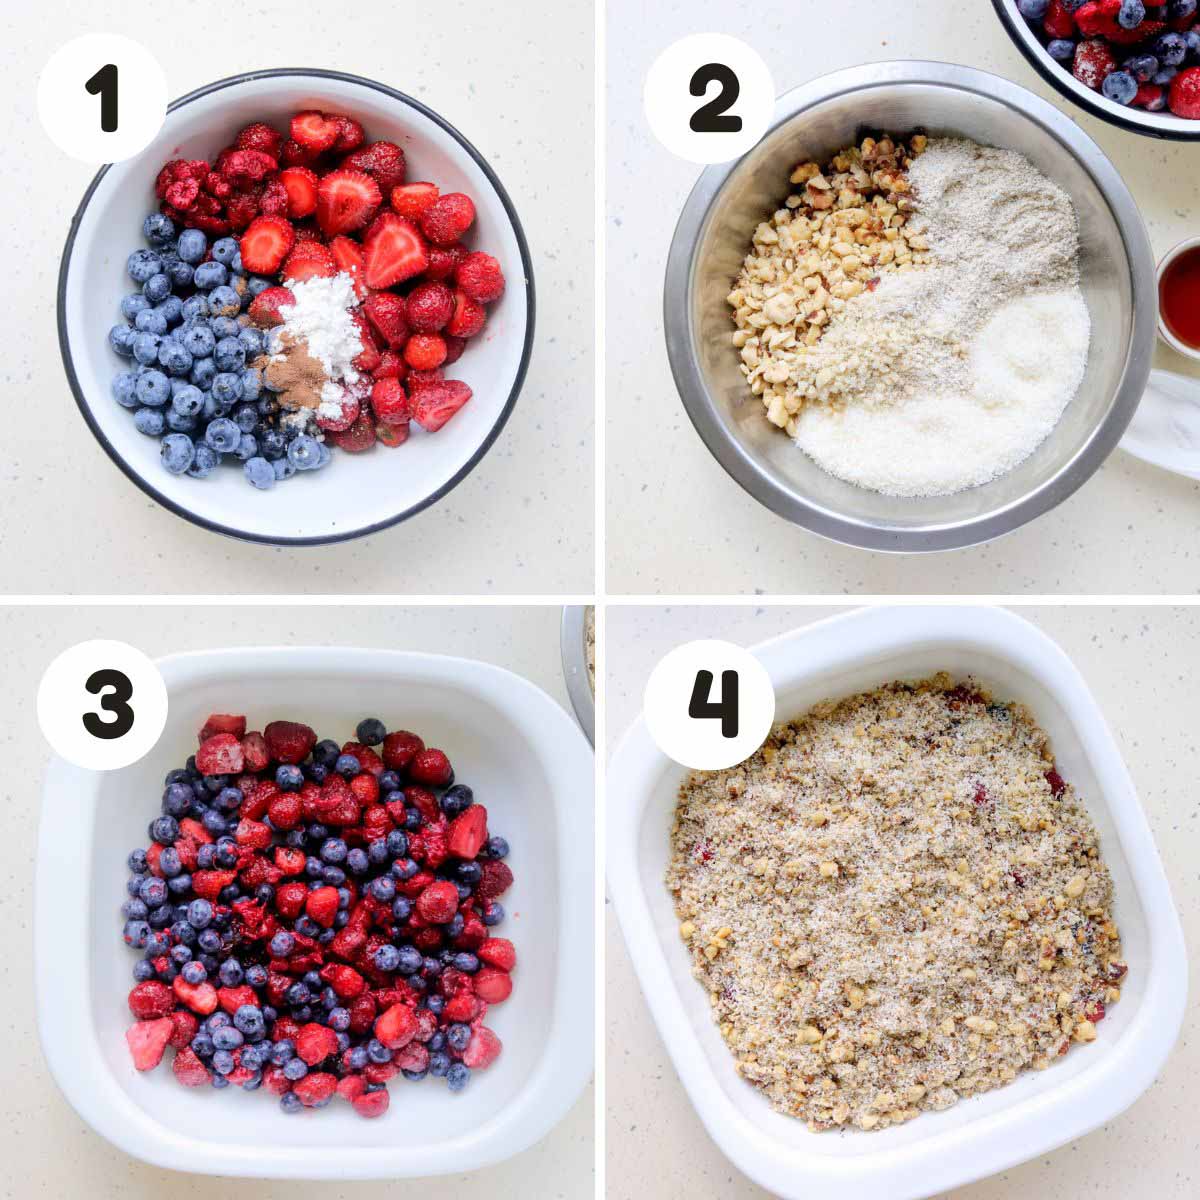 Steps to make the berry crumble.